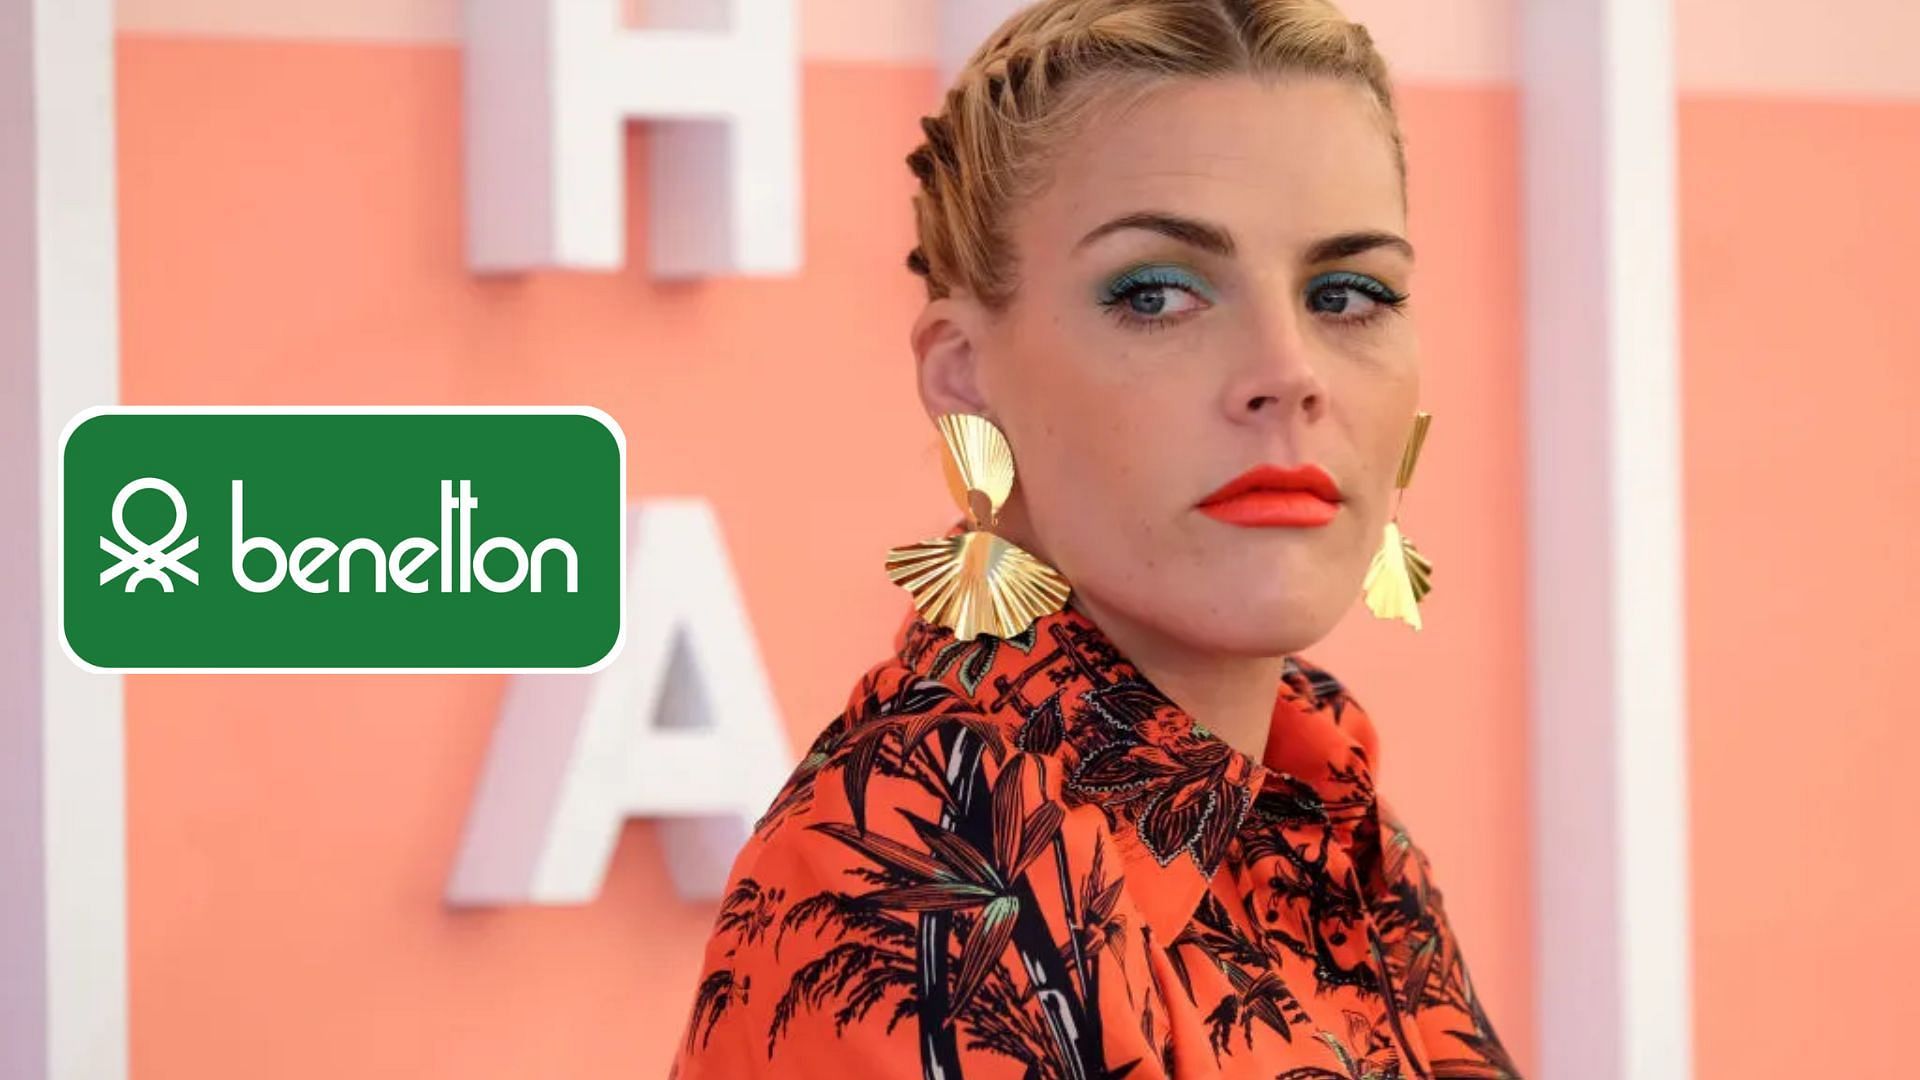 Benetton called out by Busy Philipps for poor ad campaign choice (Image via Getty/Sarah Morris and Twitter/@theirLIEStruth)